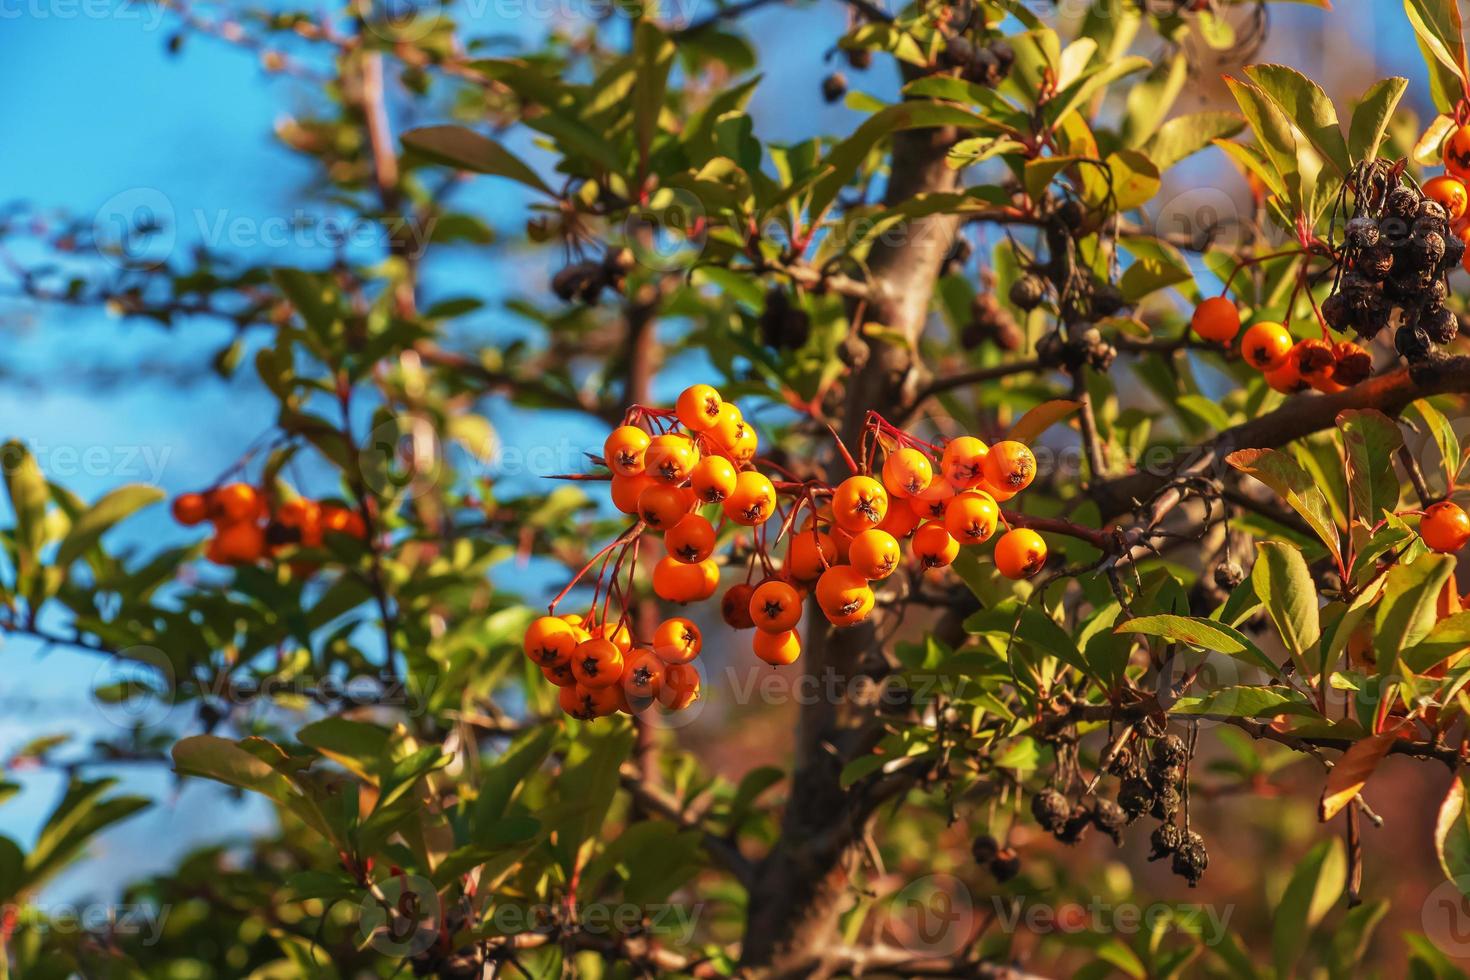 Bright red berries of Pyracantha coccinea, scarlet fiery fruits on a branch of a tree growing in the park. Blurred green bush and blue sky in the background. photo